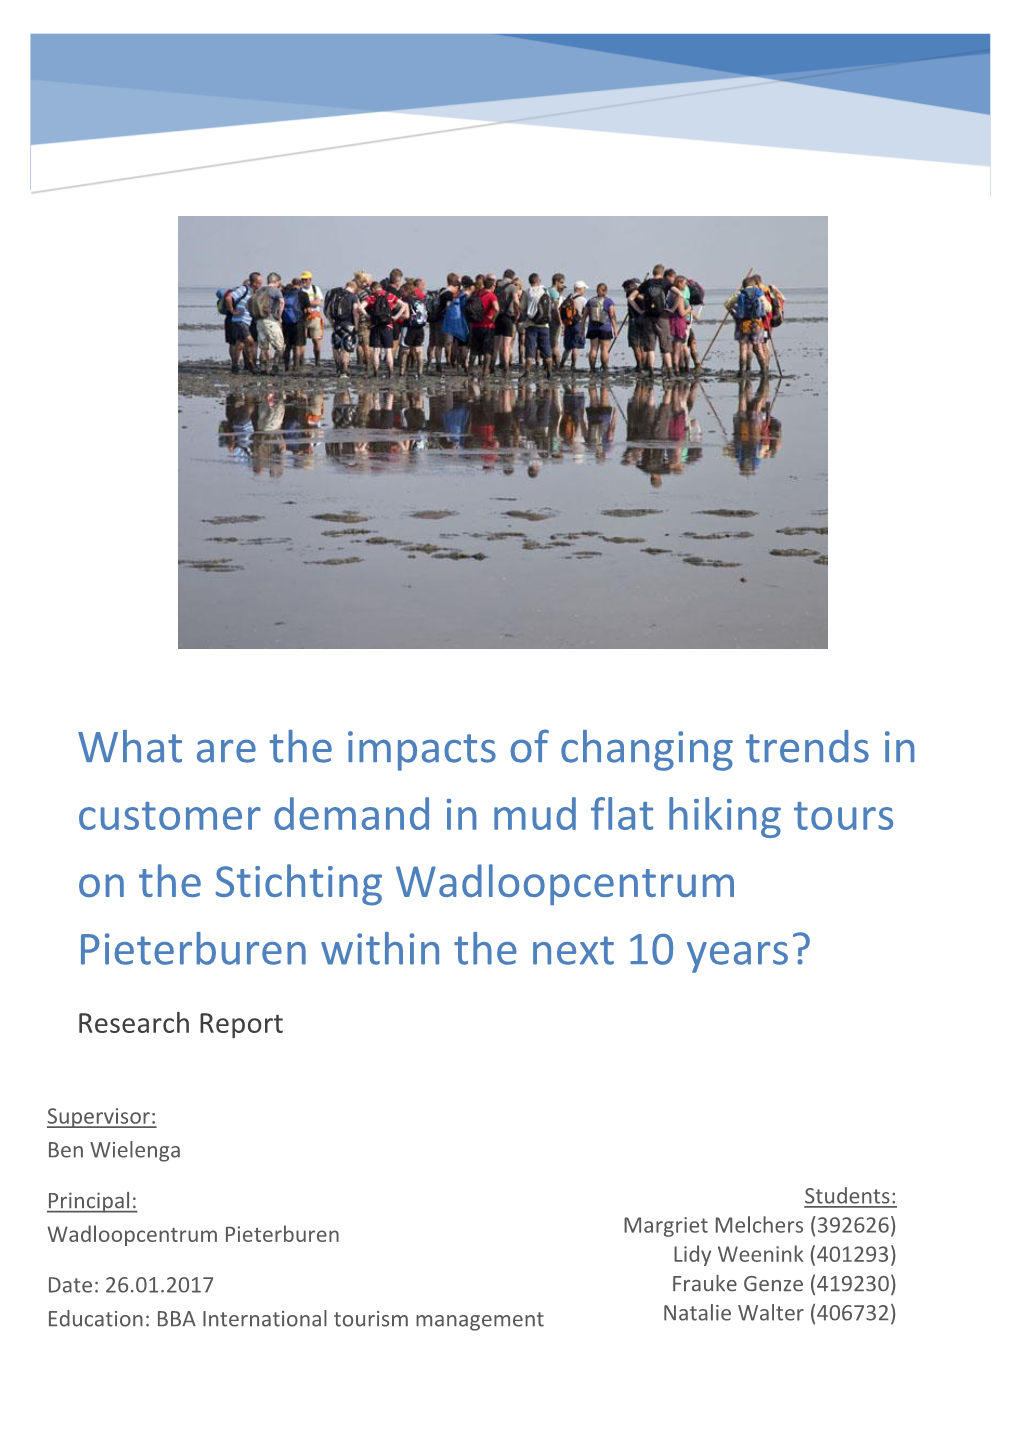 What Are the Impacts of Changing Trends in Customer Demand in Mud Flat Hiking Tours on the Stichting Wadloopcentrum Pieterburen Within the Next 10 Years?